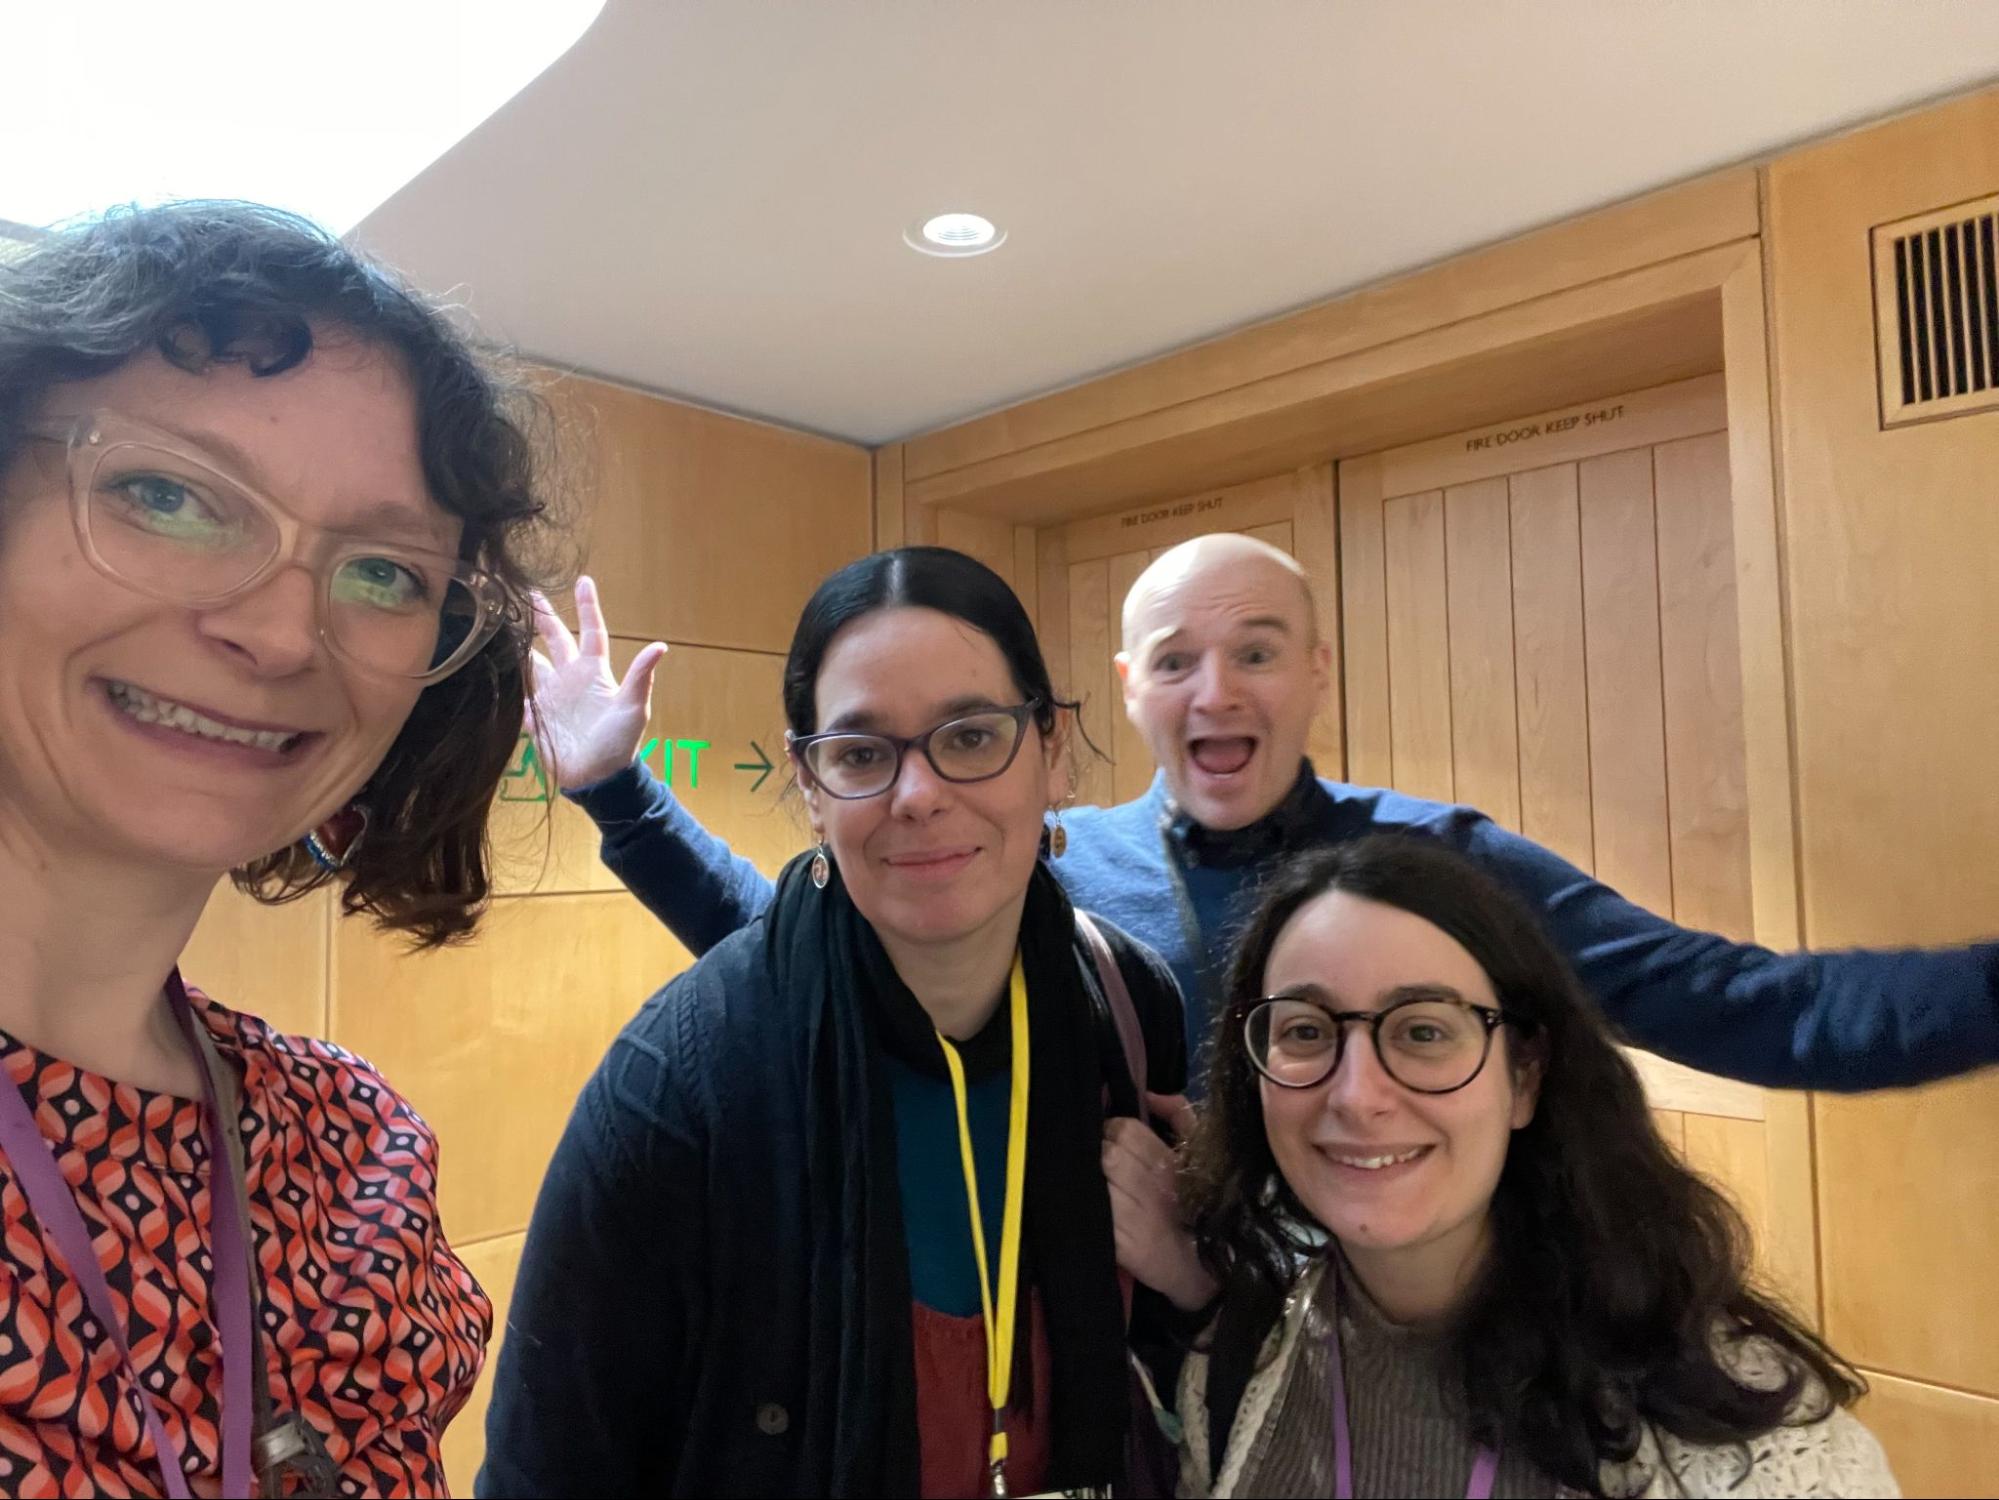 Image Description: This photo shows four people smiling at the camera at the PressPlay event, with one doing “jazz hands” in the background. From left to right: Louise from Good Things, Ana Silva, Luke Oakes and Mari Caruso-Corrado from Cambridgeshire Libraries.